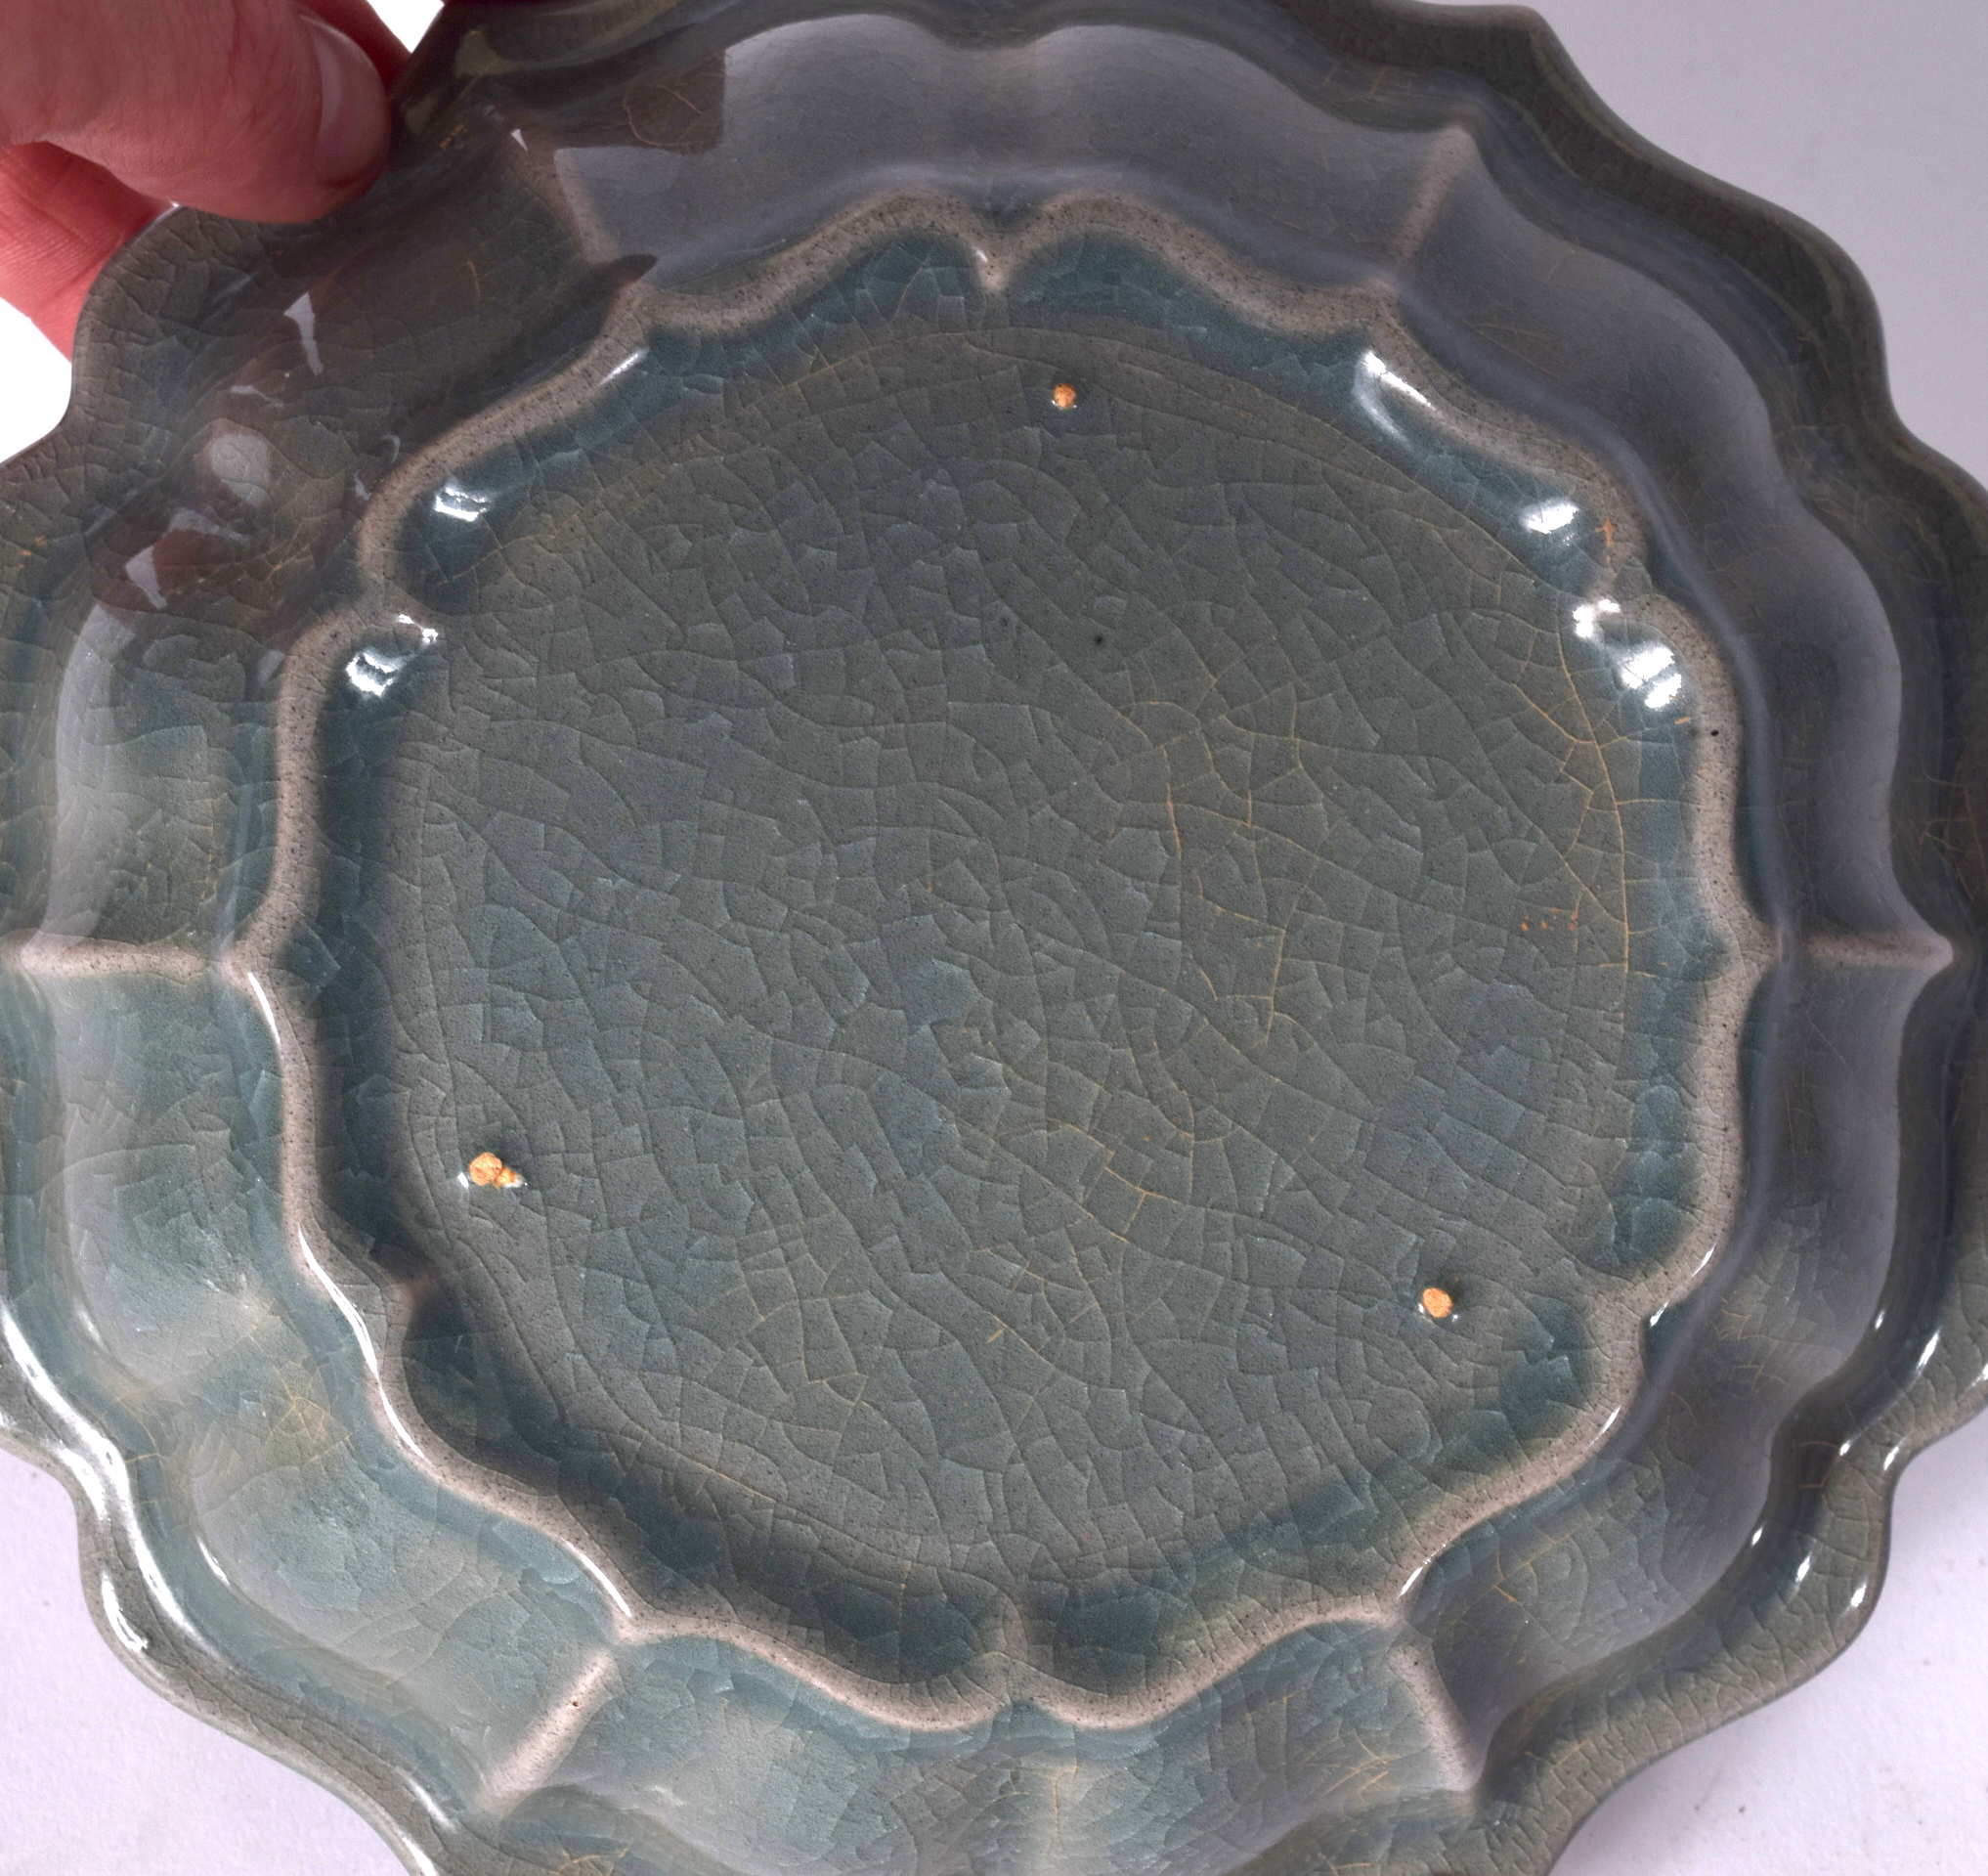 A CHINESE CELADON GLAZED PORCELAIN DISH, lobed in form. 19.5 cm wide. - Image 2 of 2